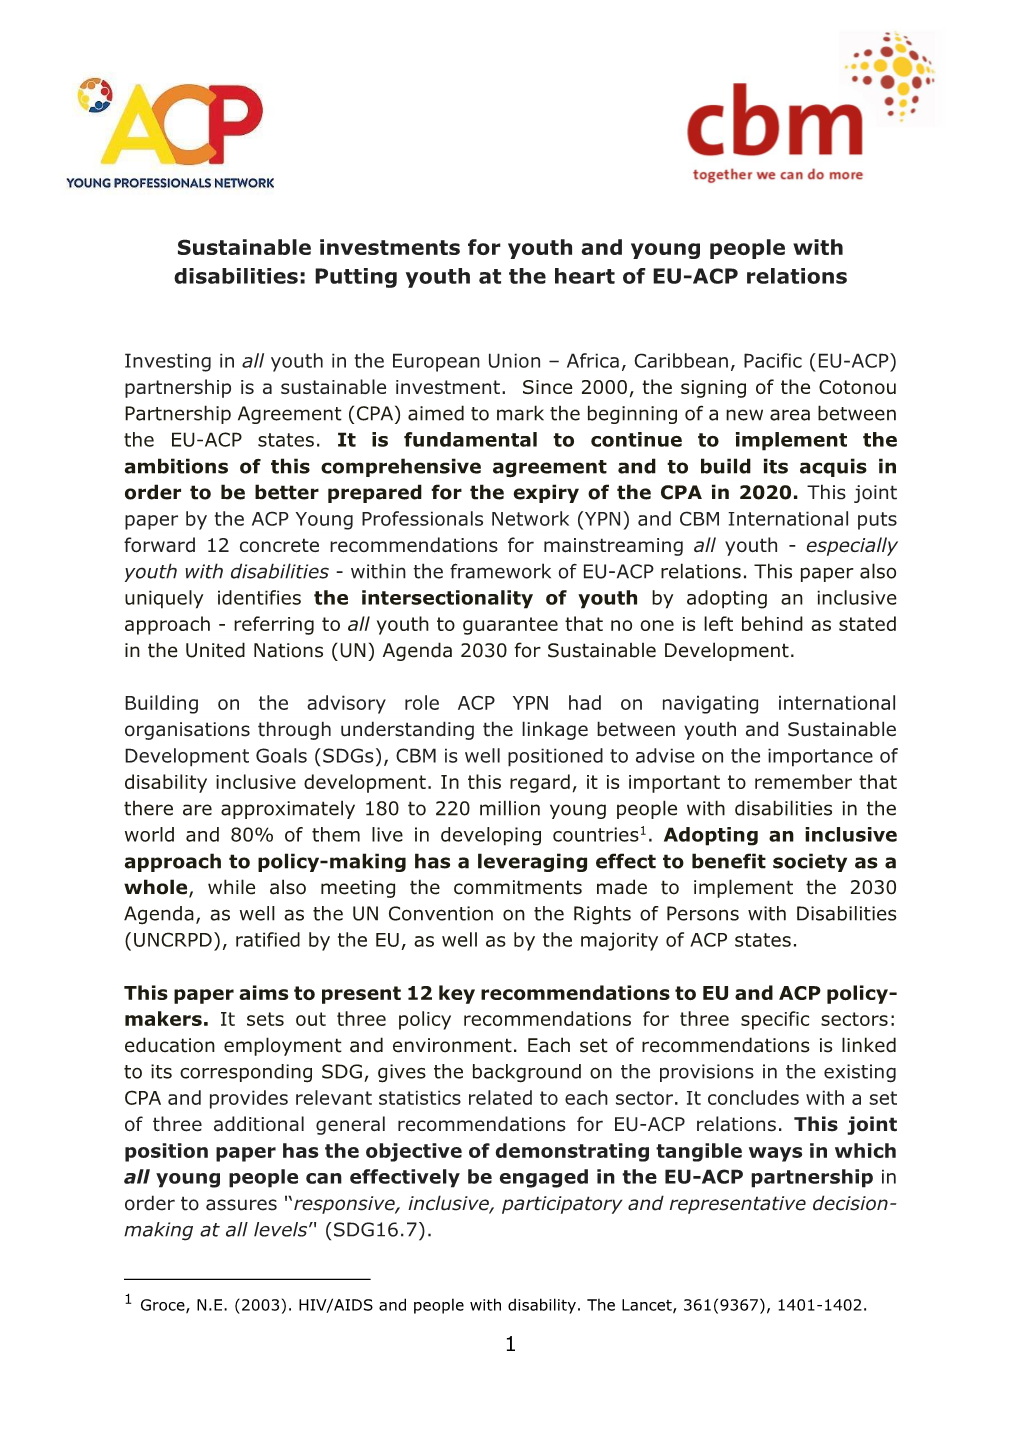 Putting Youth at the Heart of EU-ACP Relations